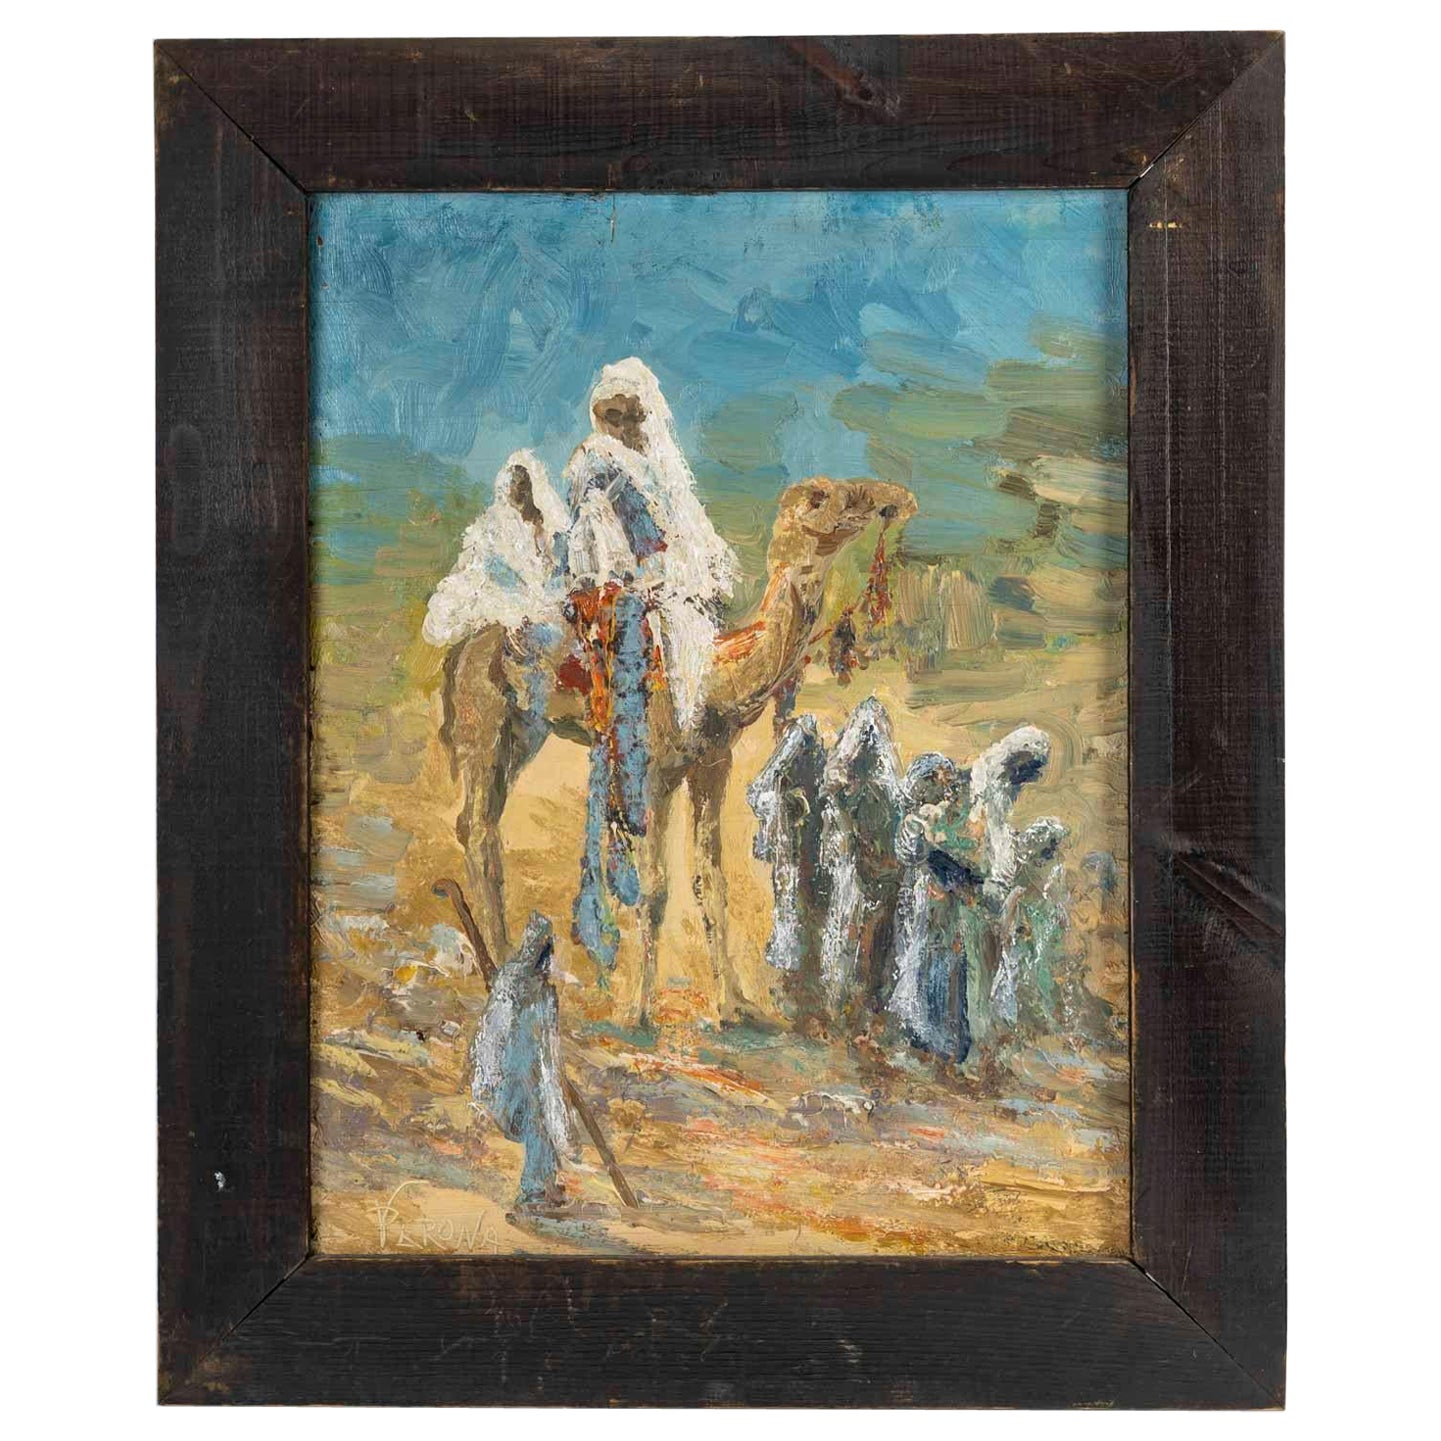 Orientalist Painting by Lucien Pérona, Early 20th Century.